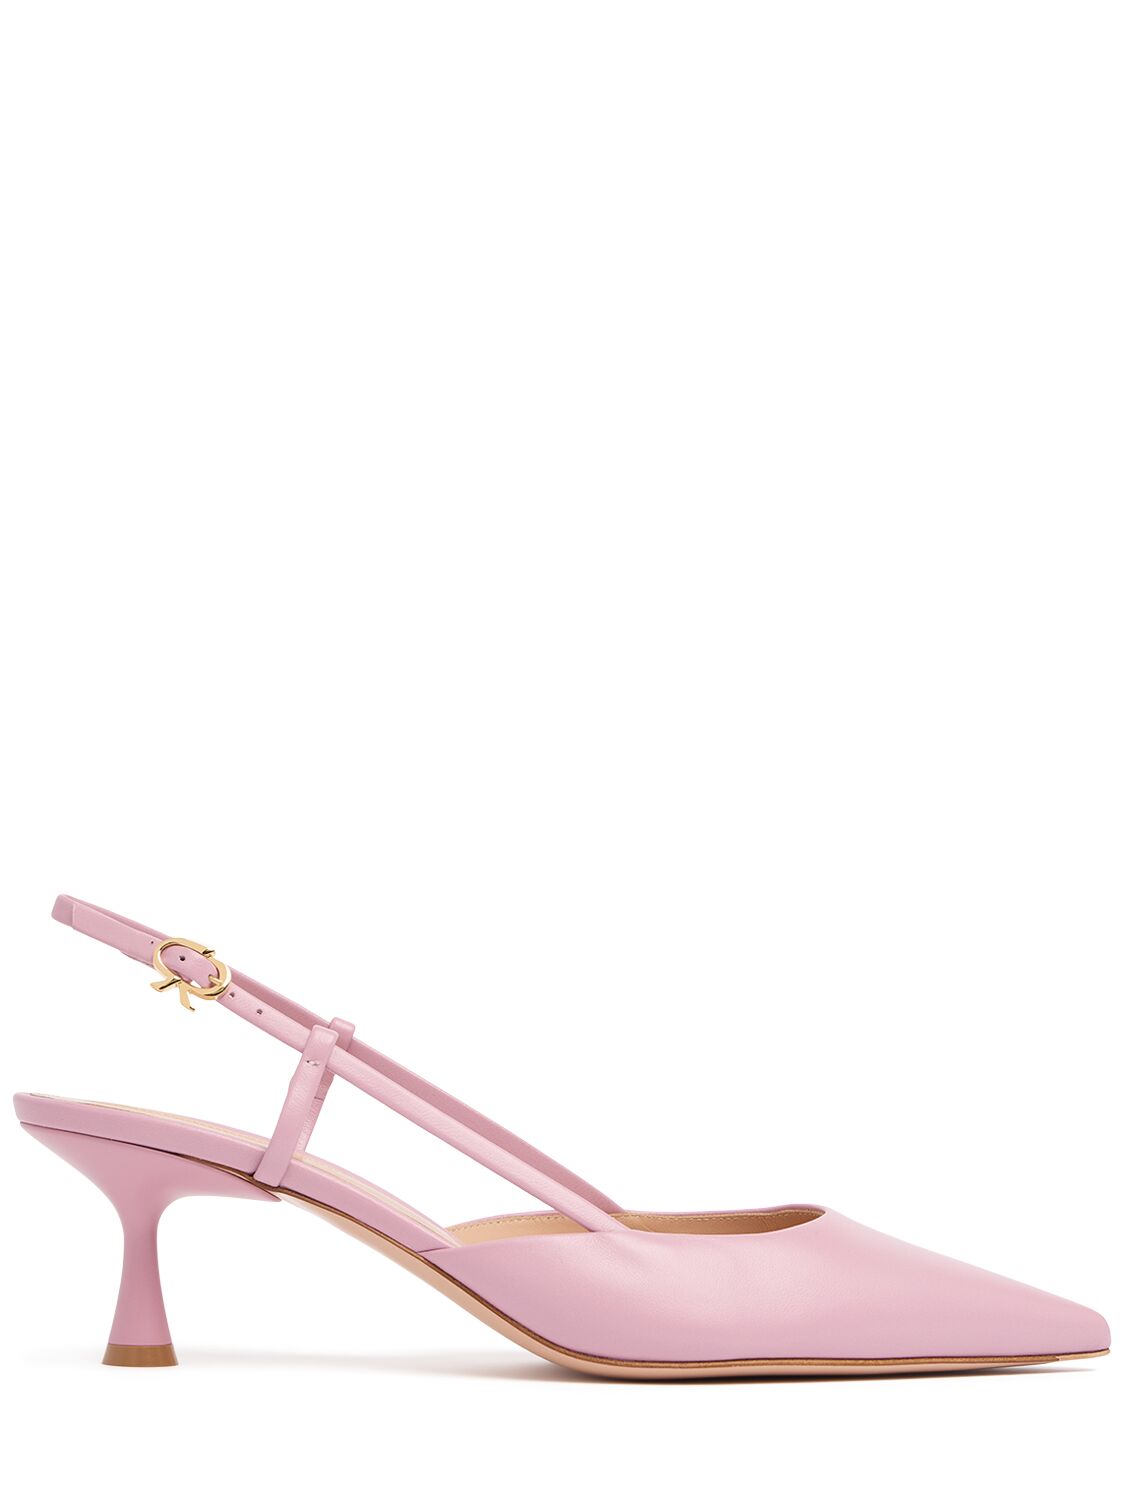 Gianvito Rossi 55mm Ascent Leather Slingback Pumps In Pink